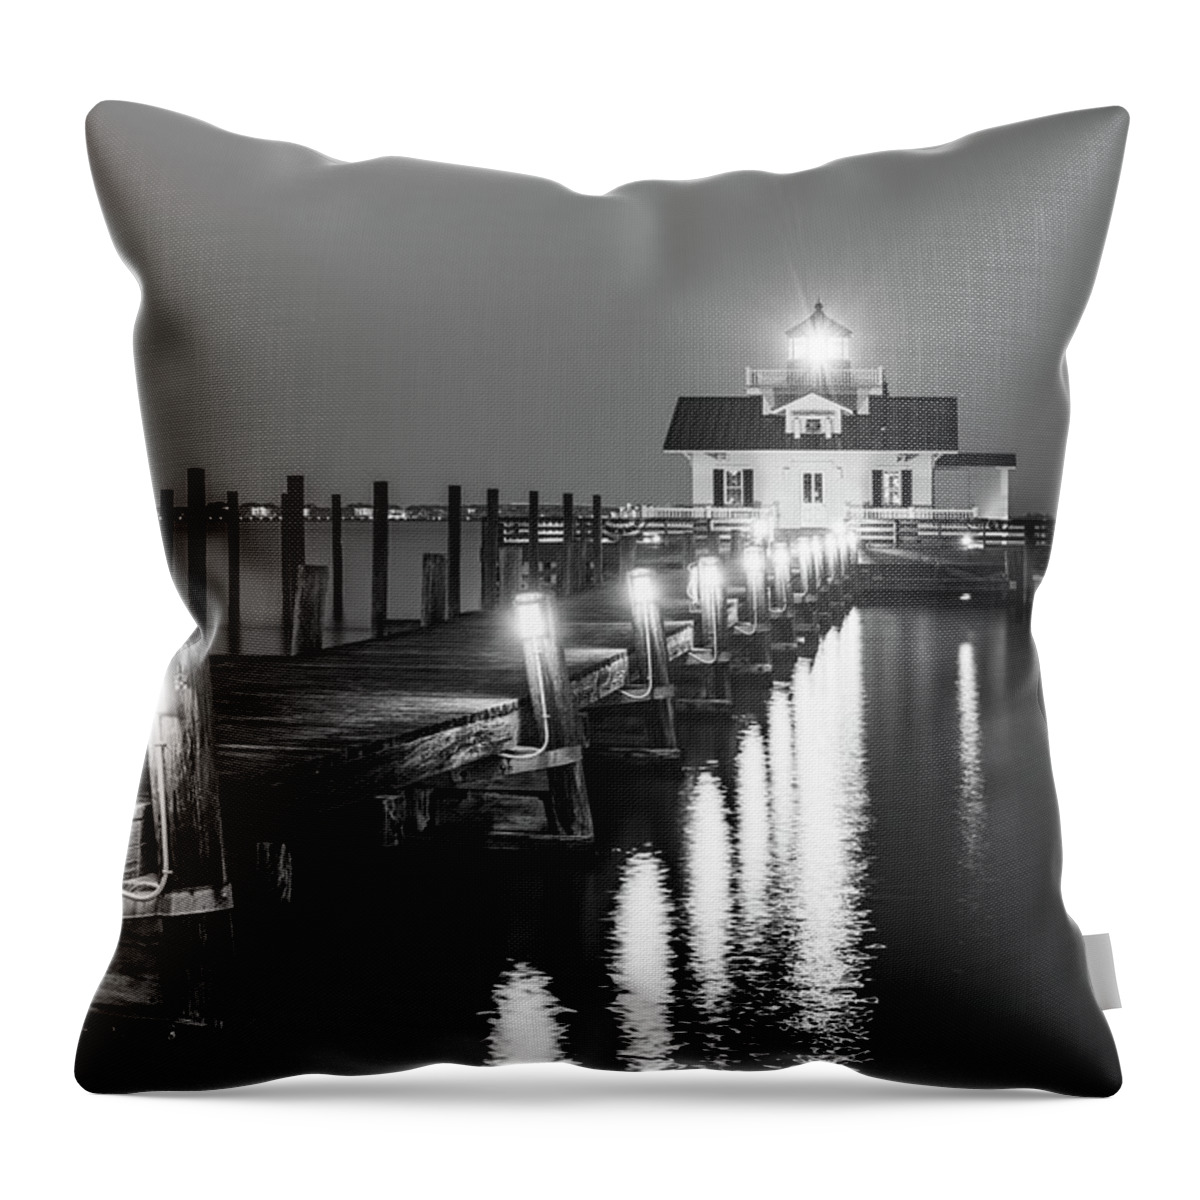 Roanoke Lighthouse Throw Pillow featuring the photograph Roanoke Marshes Lighthouse Guiding Light - Black And White by Gregory Ballos